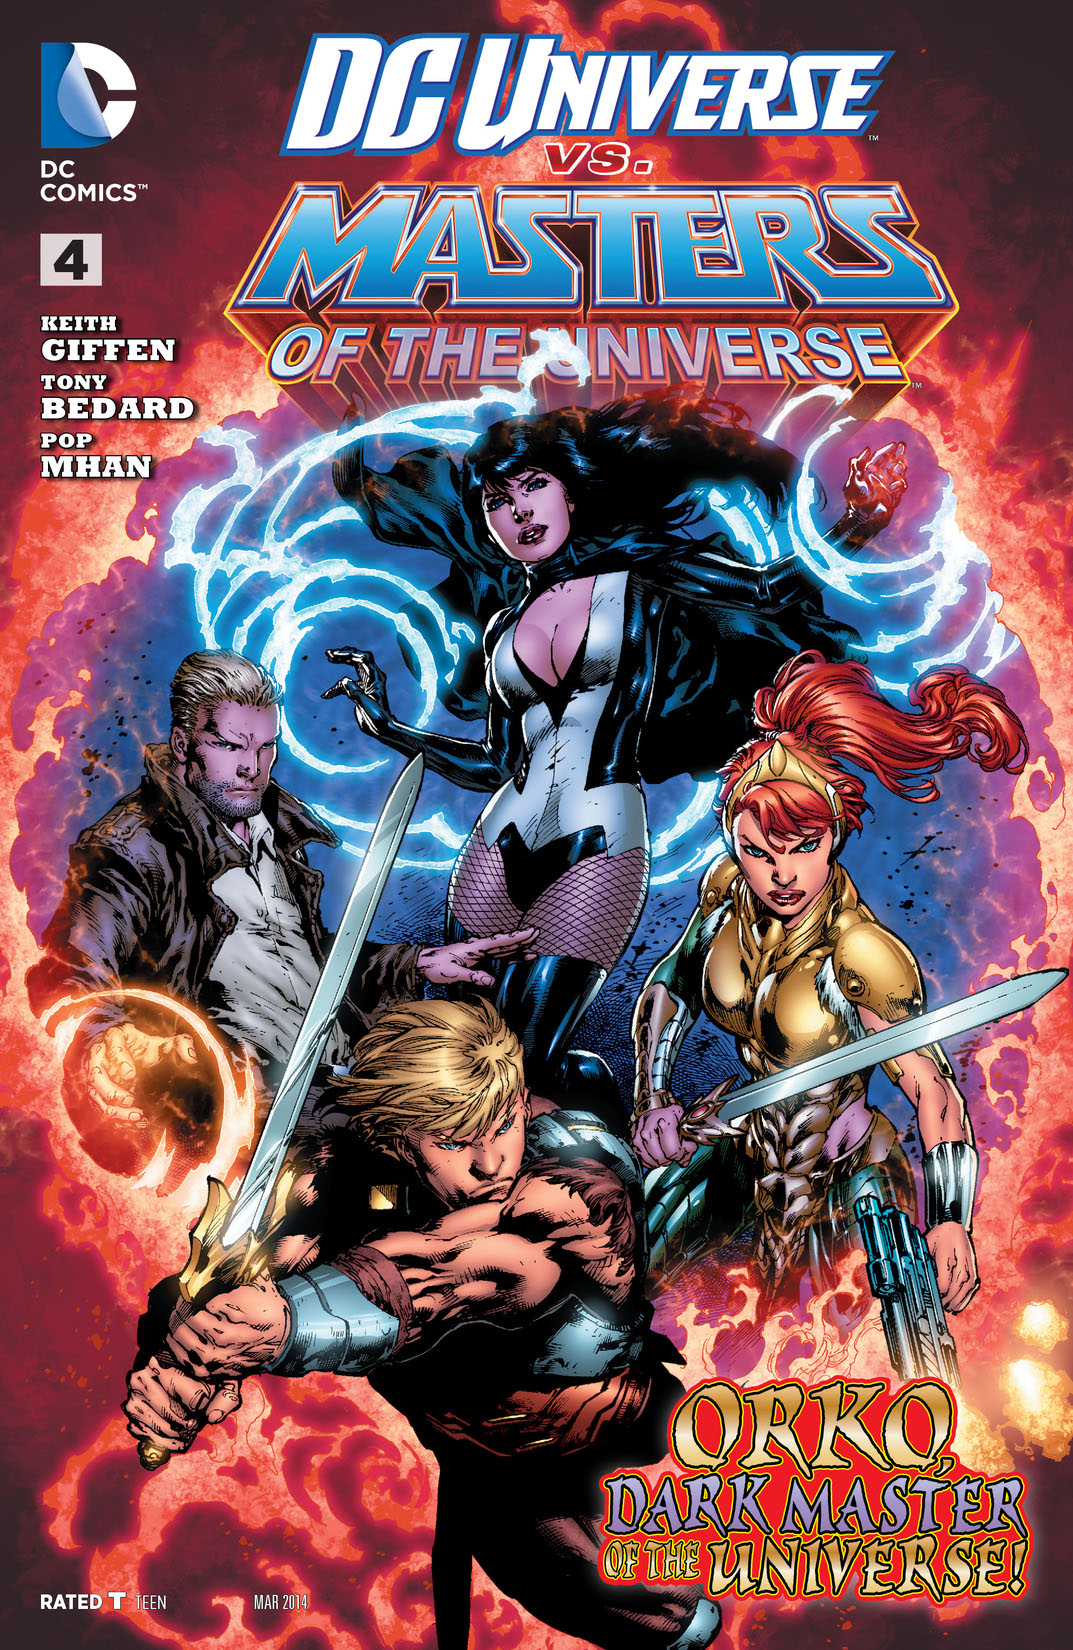 DC Universe vs. Masters of the Universe #4 preview images